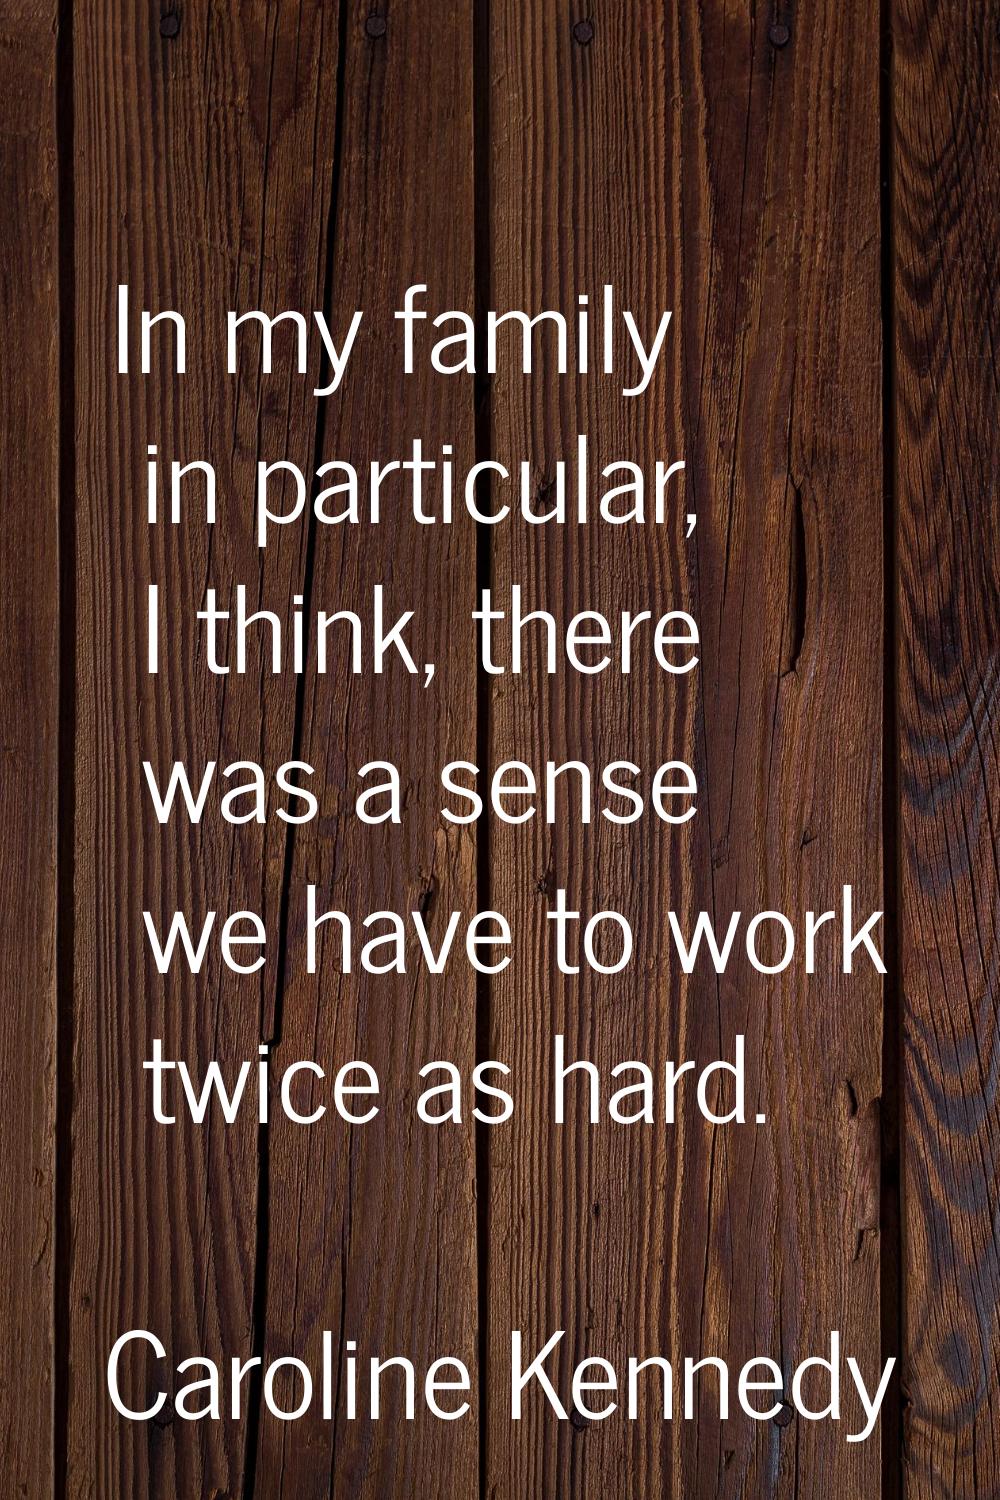 In my family in particular, I think, there was a sense we have to work twice as hard.